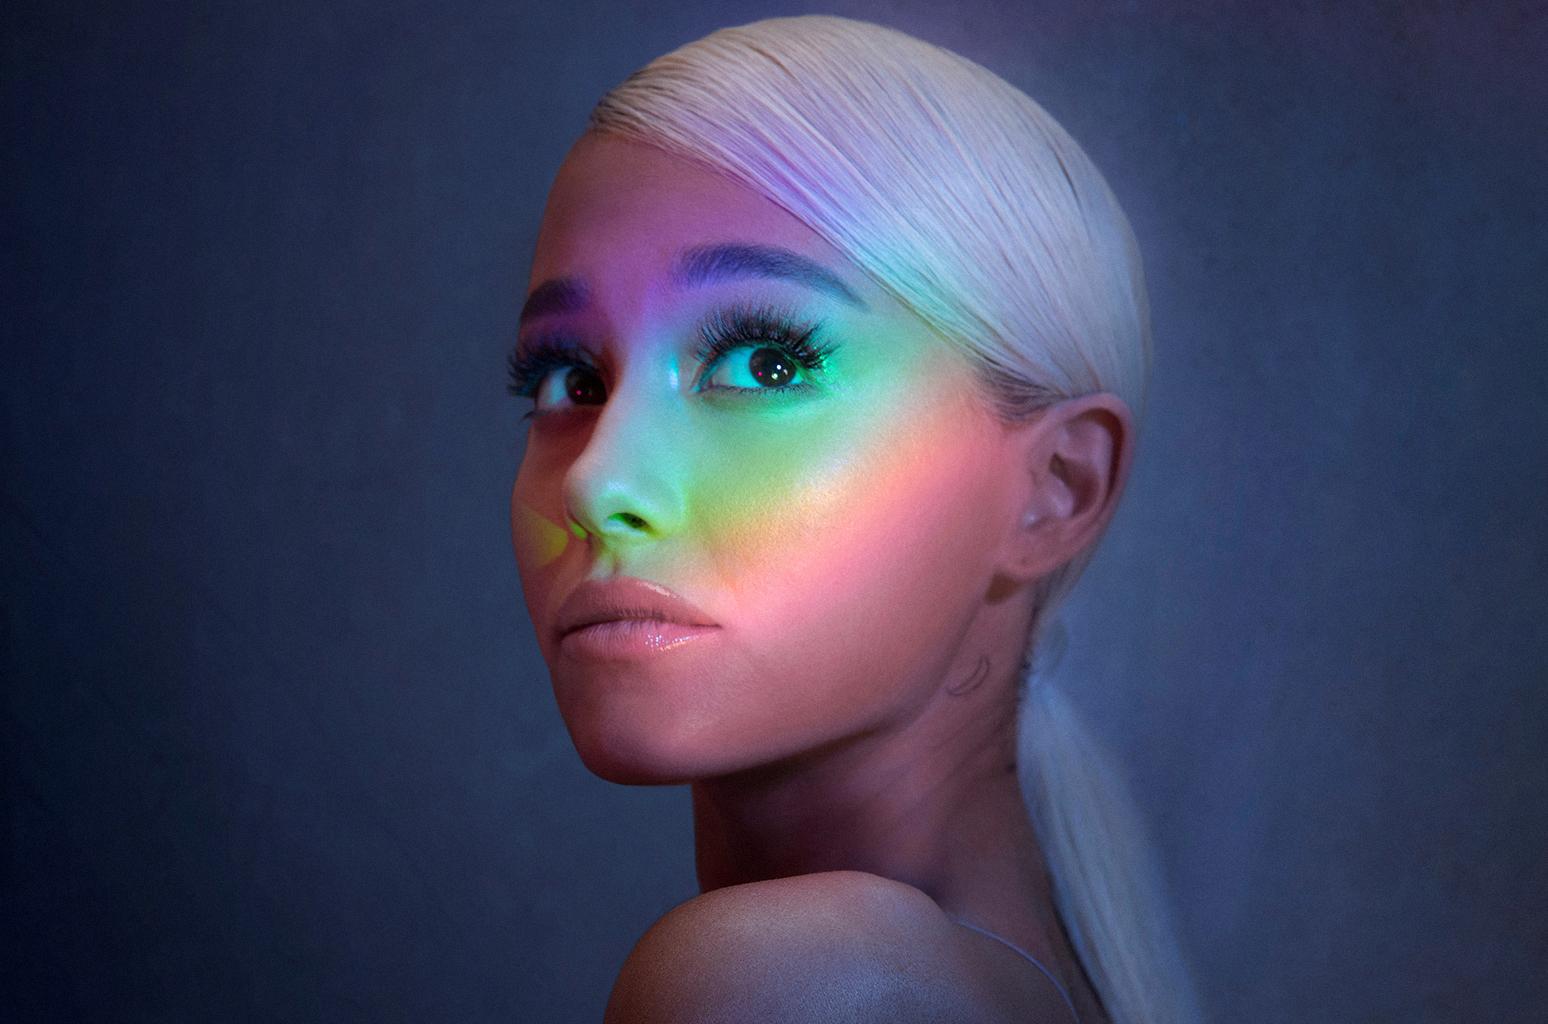 Ariana Grande, 'Thank U, Next': New Song Released Ahead